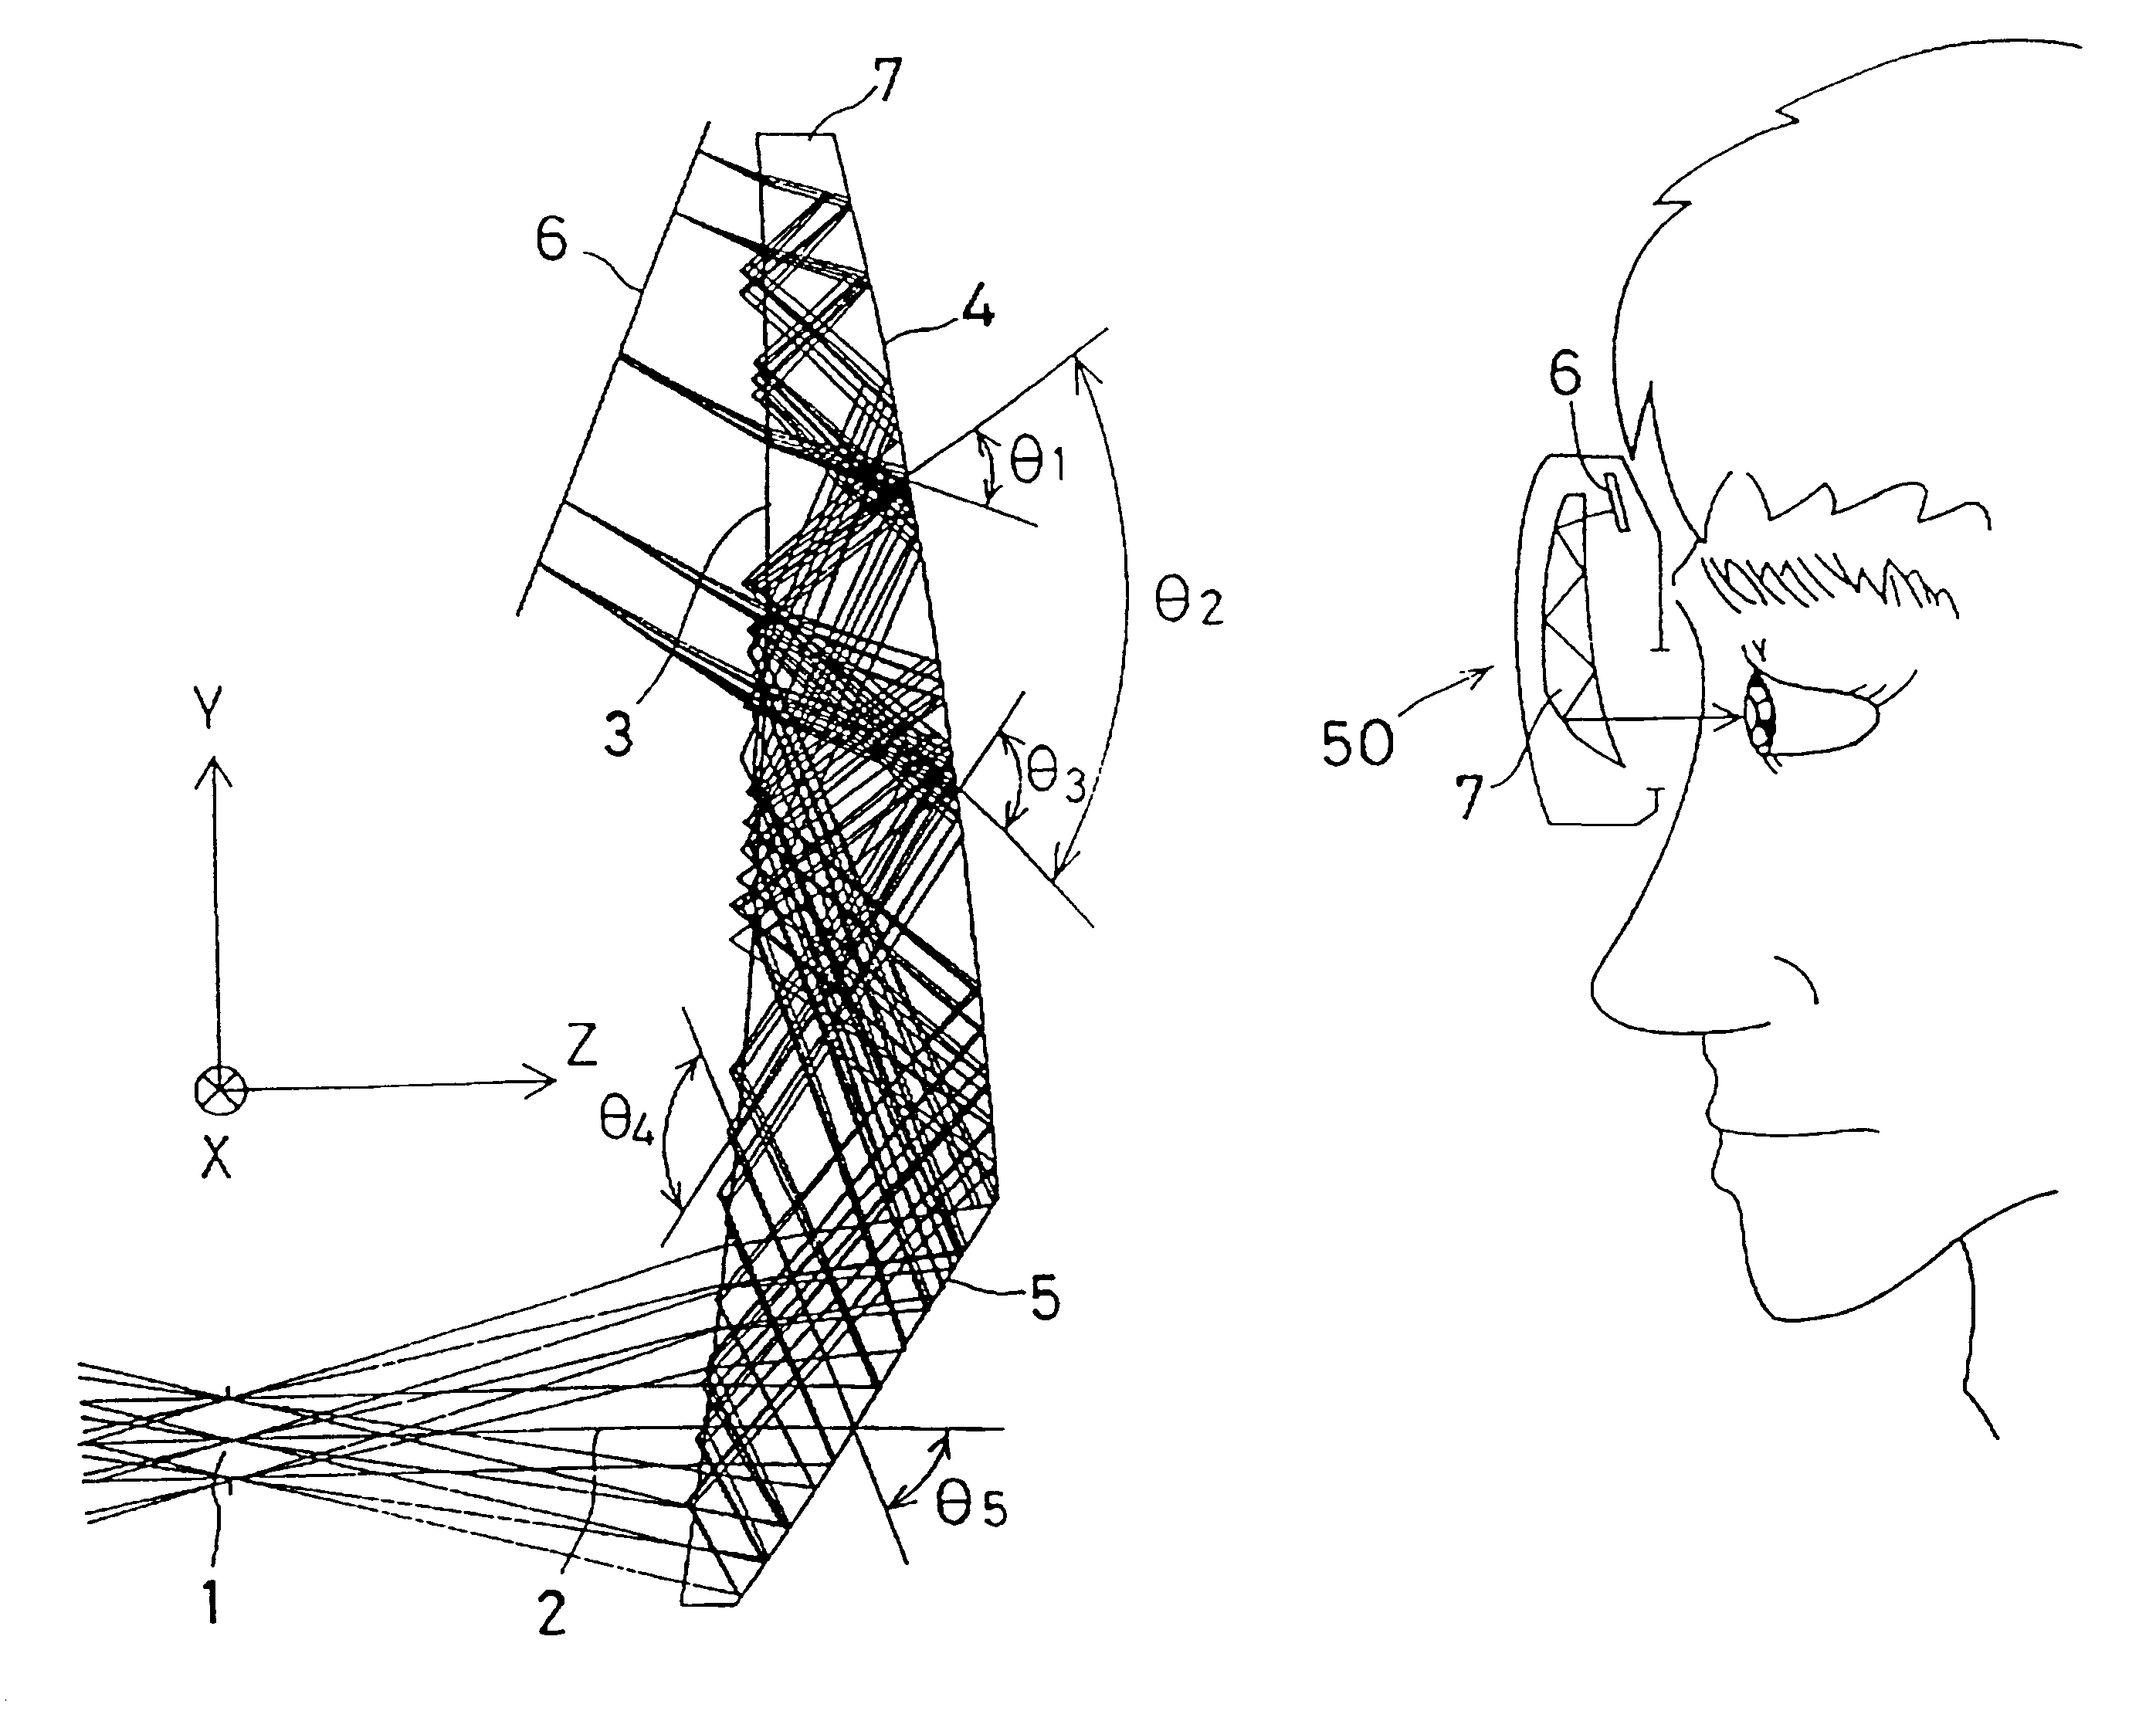 Ocular optics system having at least four reflections occurring between curved surfaces